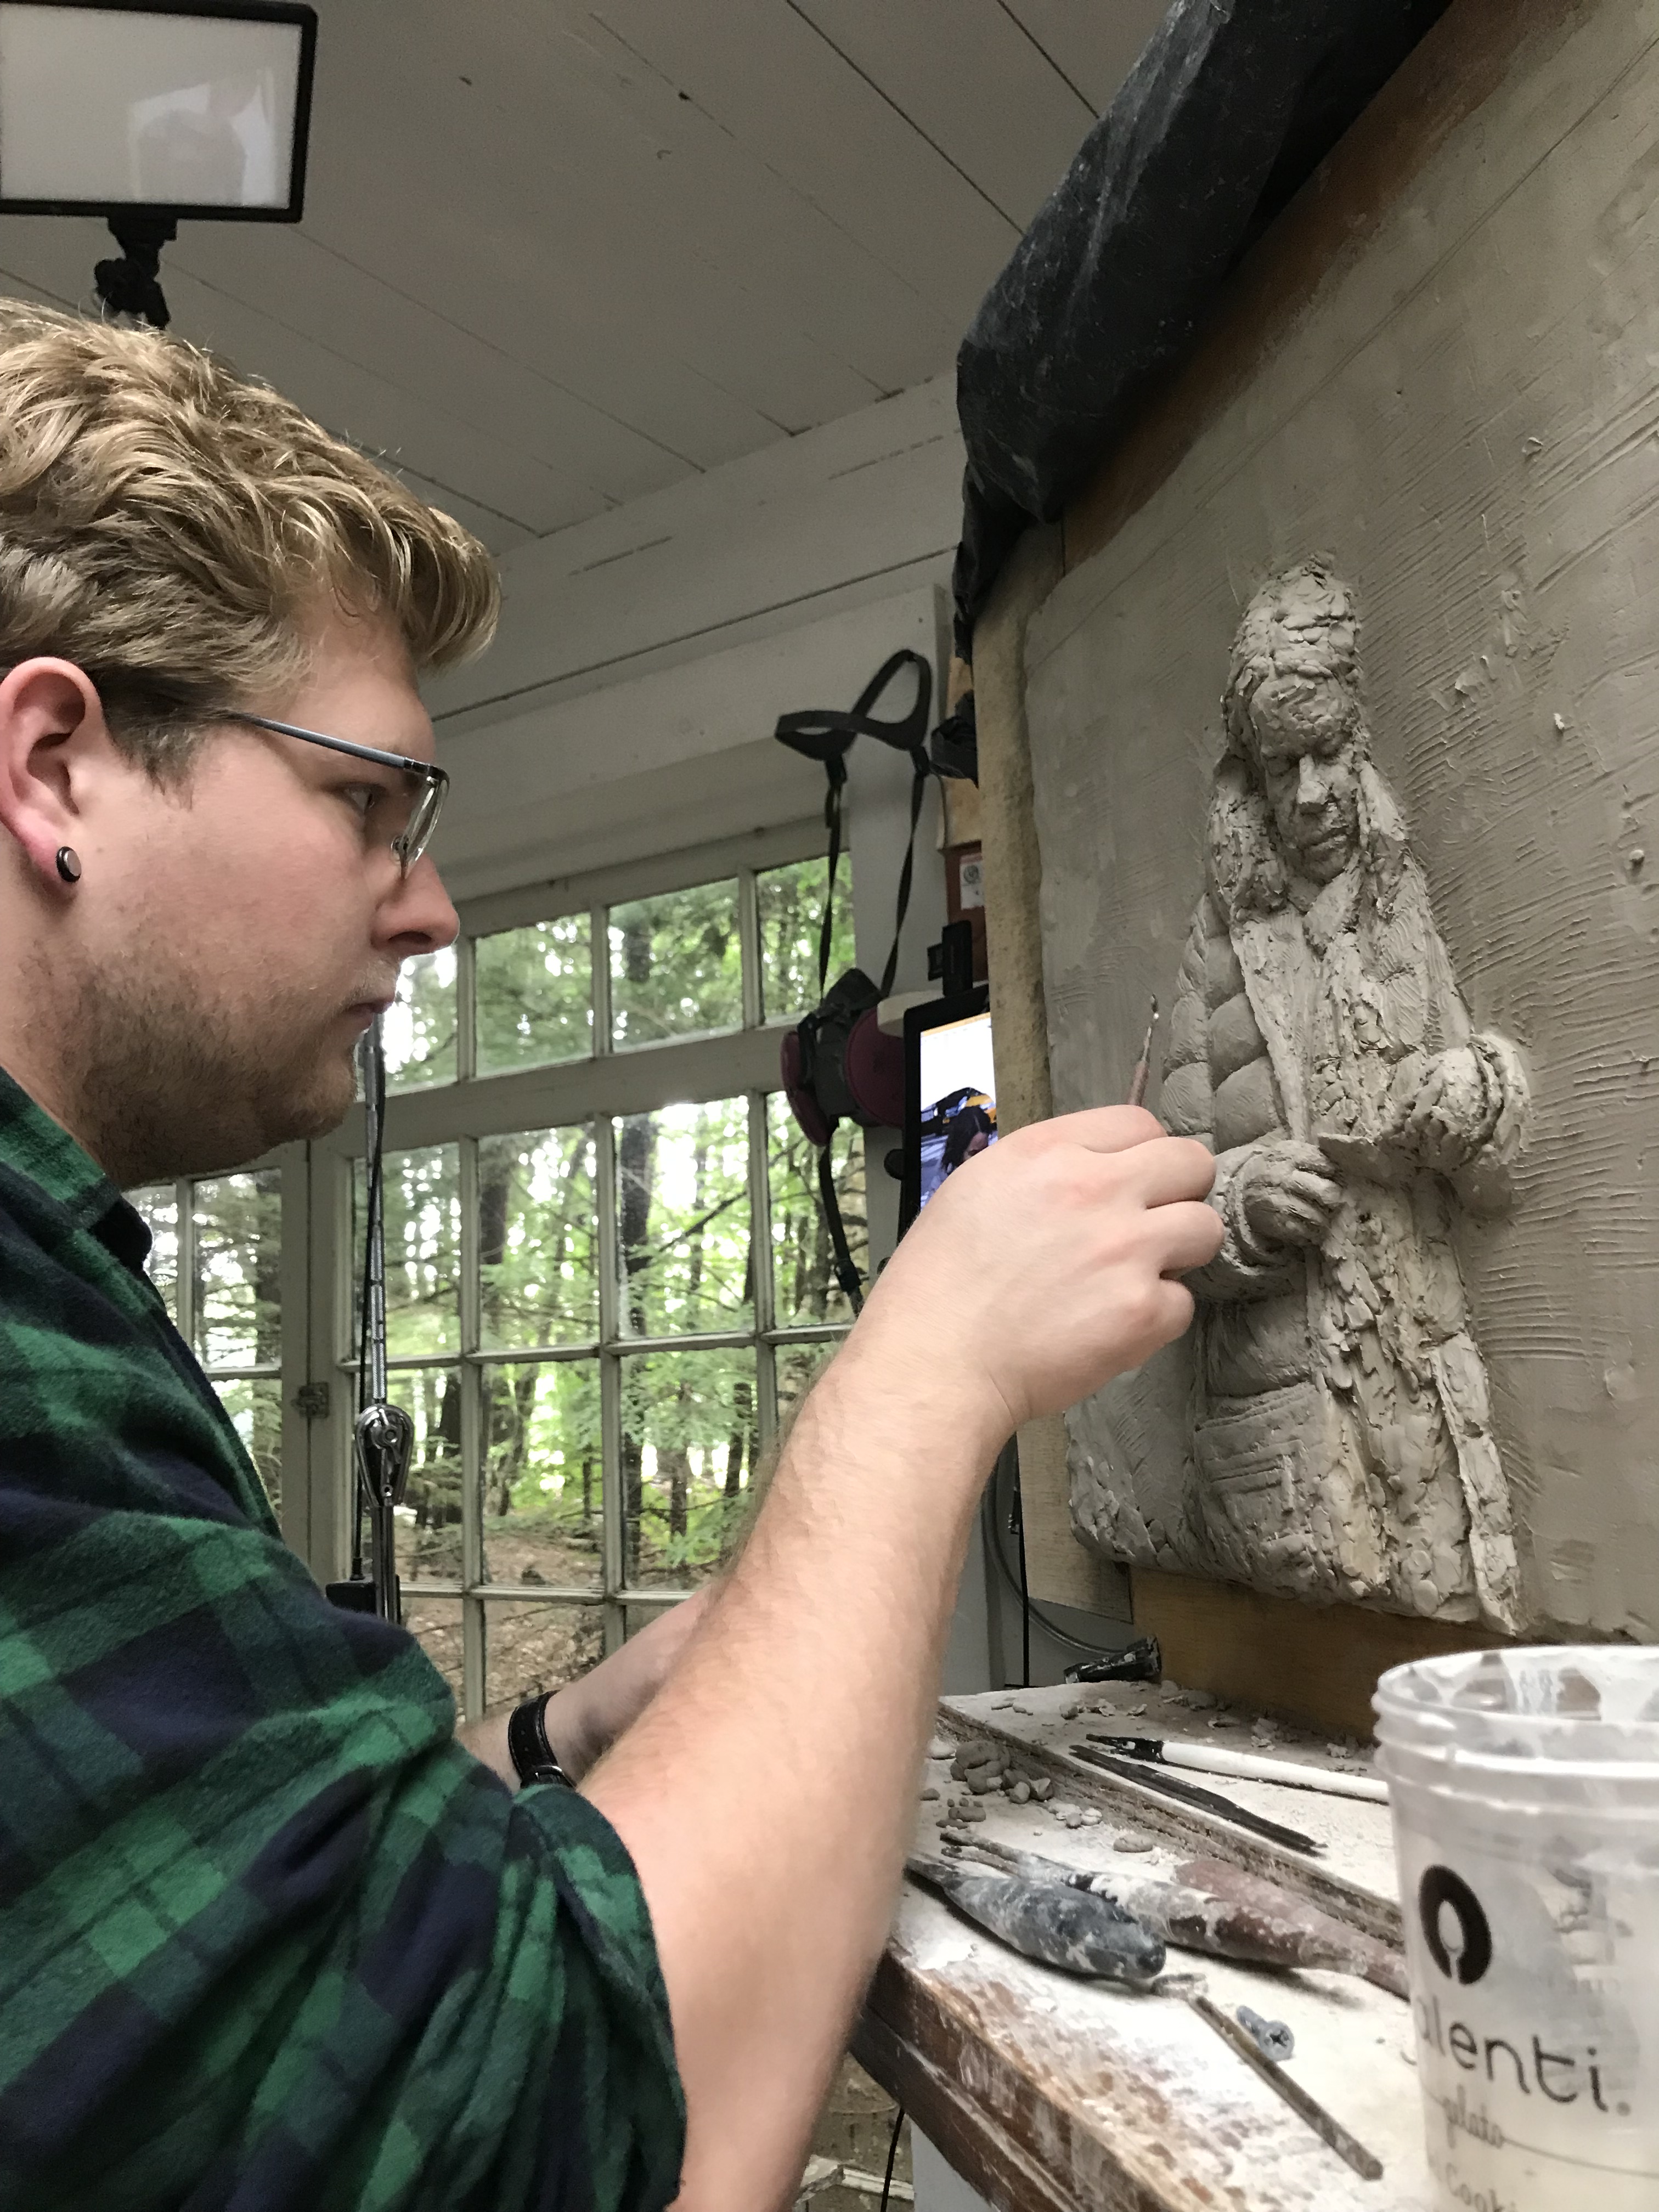 Dan Willig 2019 SIR at work with clay